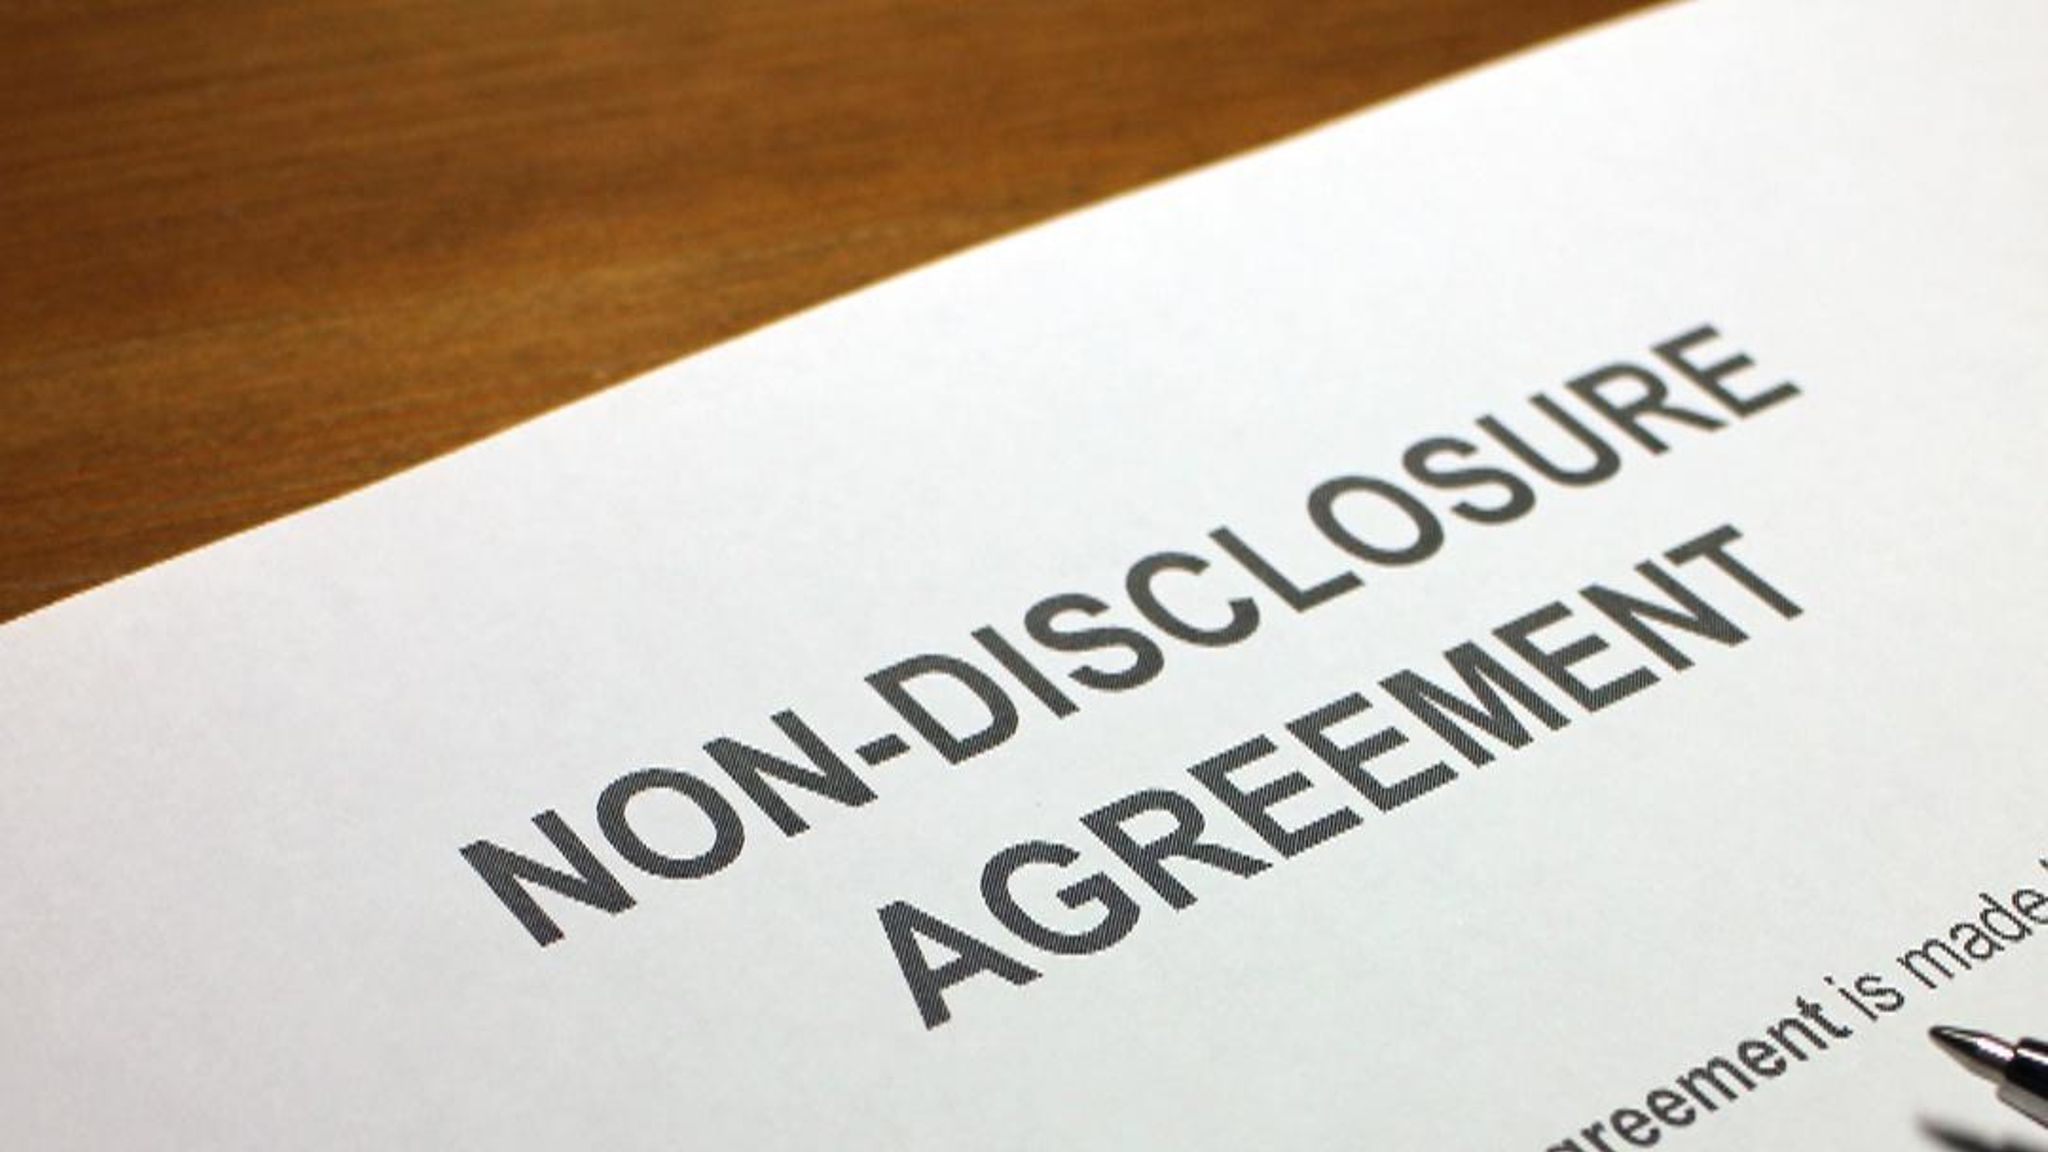 Website Design Non Disclosure Agreement There Have Been Calls To Tighten The Rules Around The Use Of Ndas Or Hush Agreements